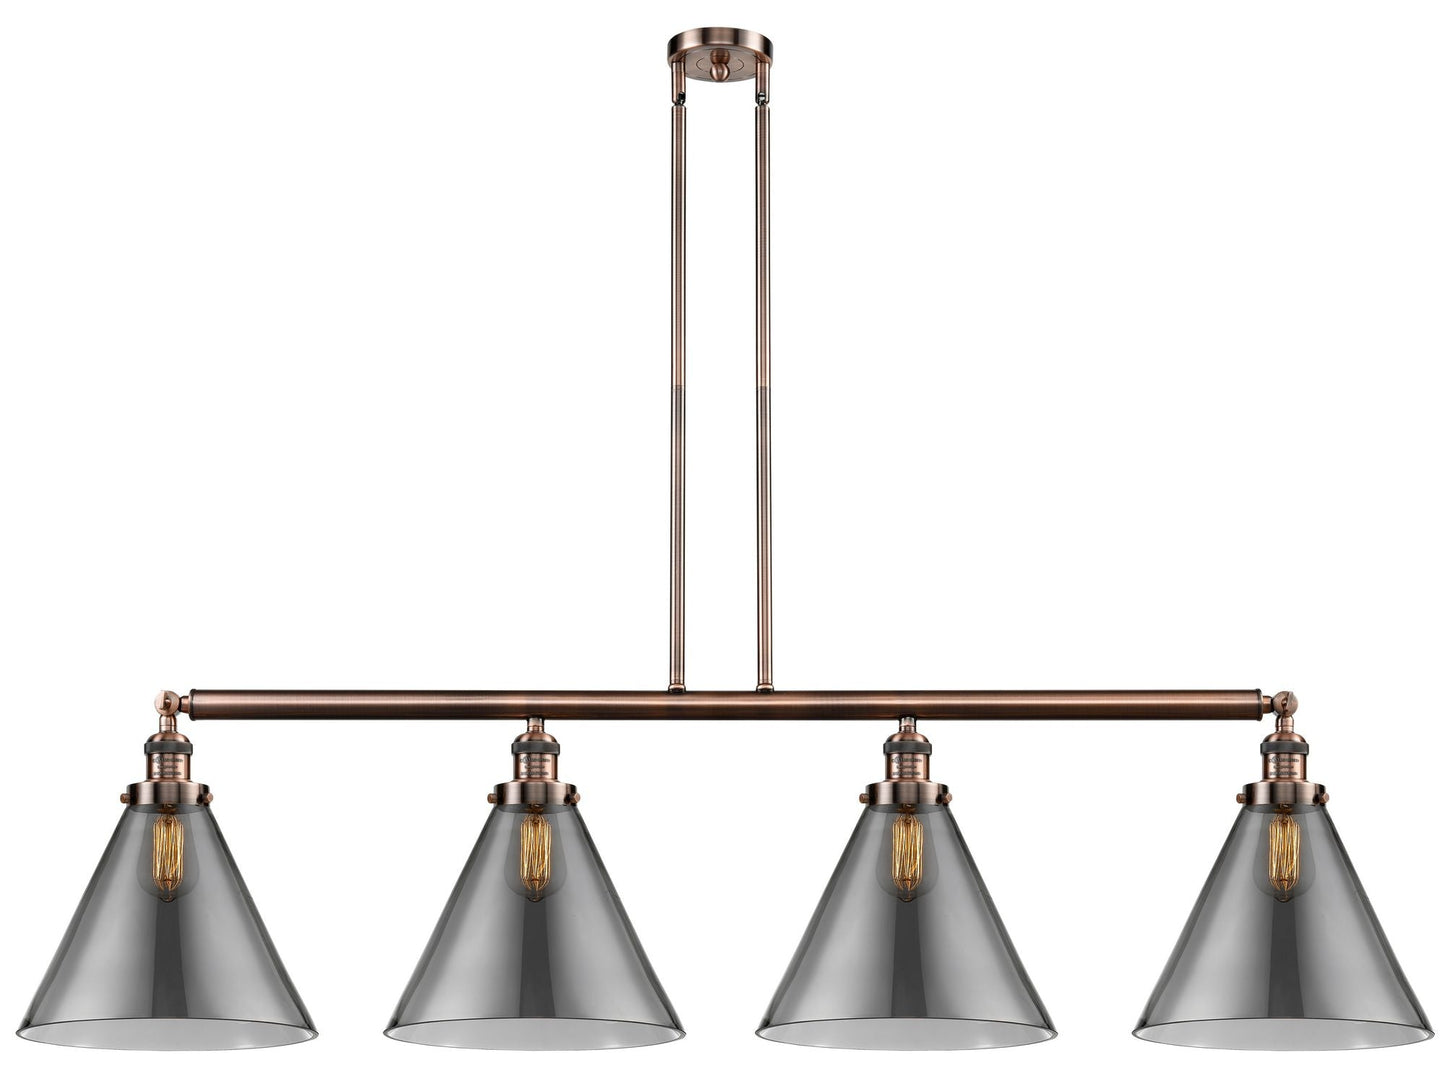 214-AC-G43-L 4-Light 56" Antique Copper Island Light - Plated Smoke Cone 12" Glass - LED Bulb - Dimmensions: 56 x 12 x 14<br>Minimum Height : 24.25<br>Maximum Height : 48.25 - Sloped Ceiling Compatible: Yes